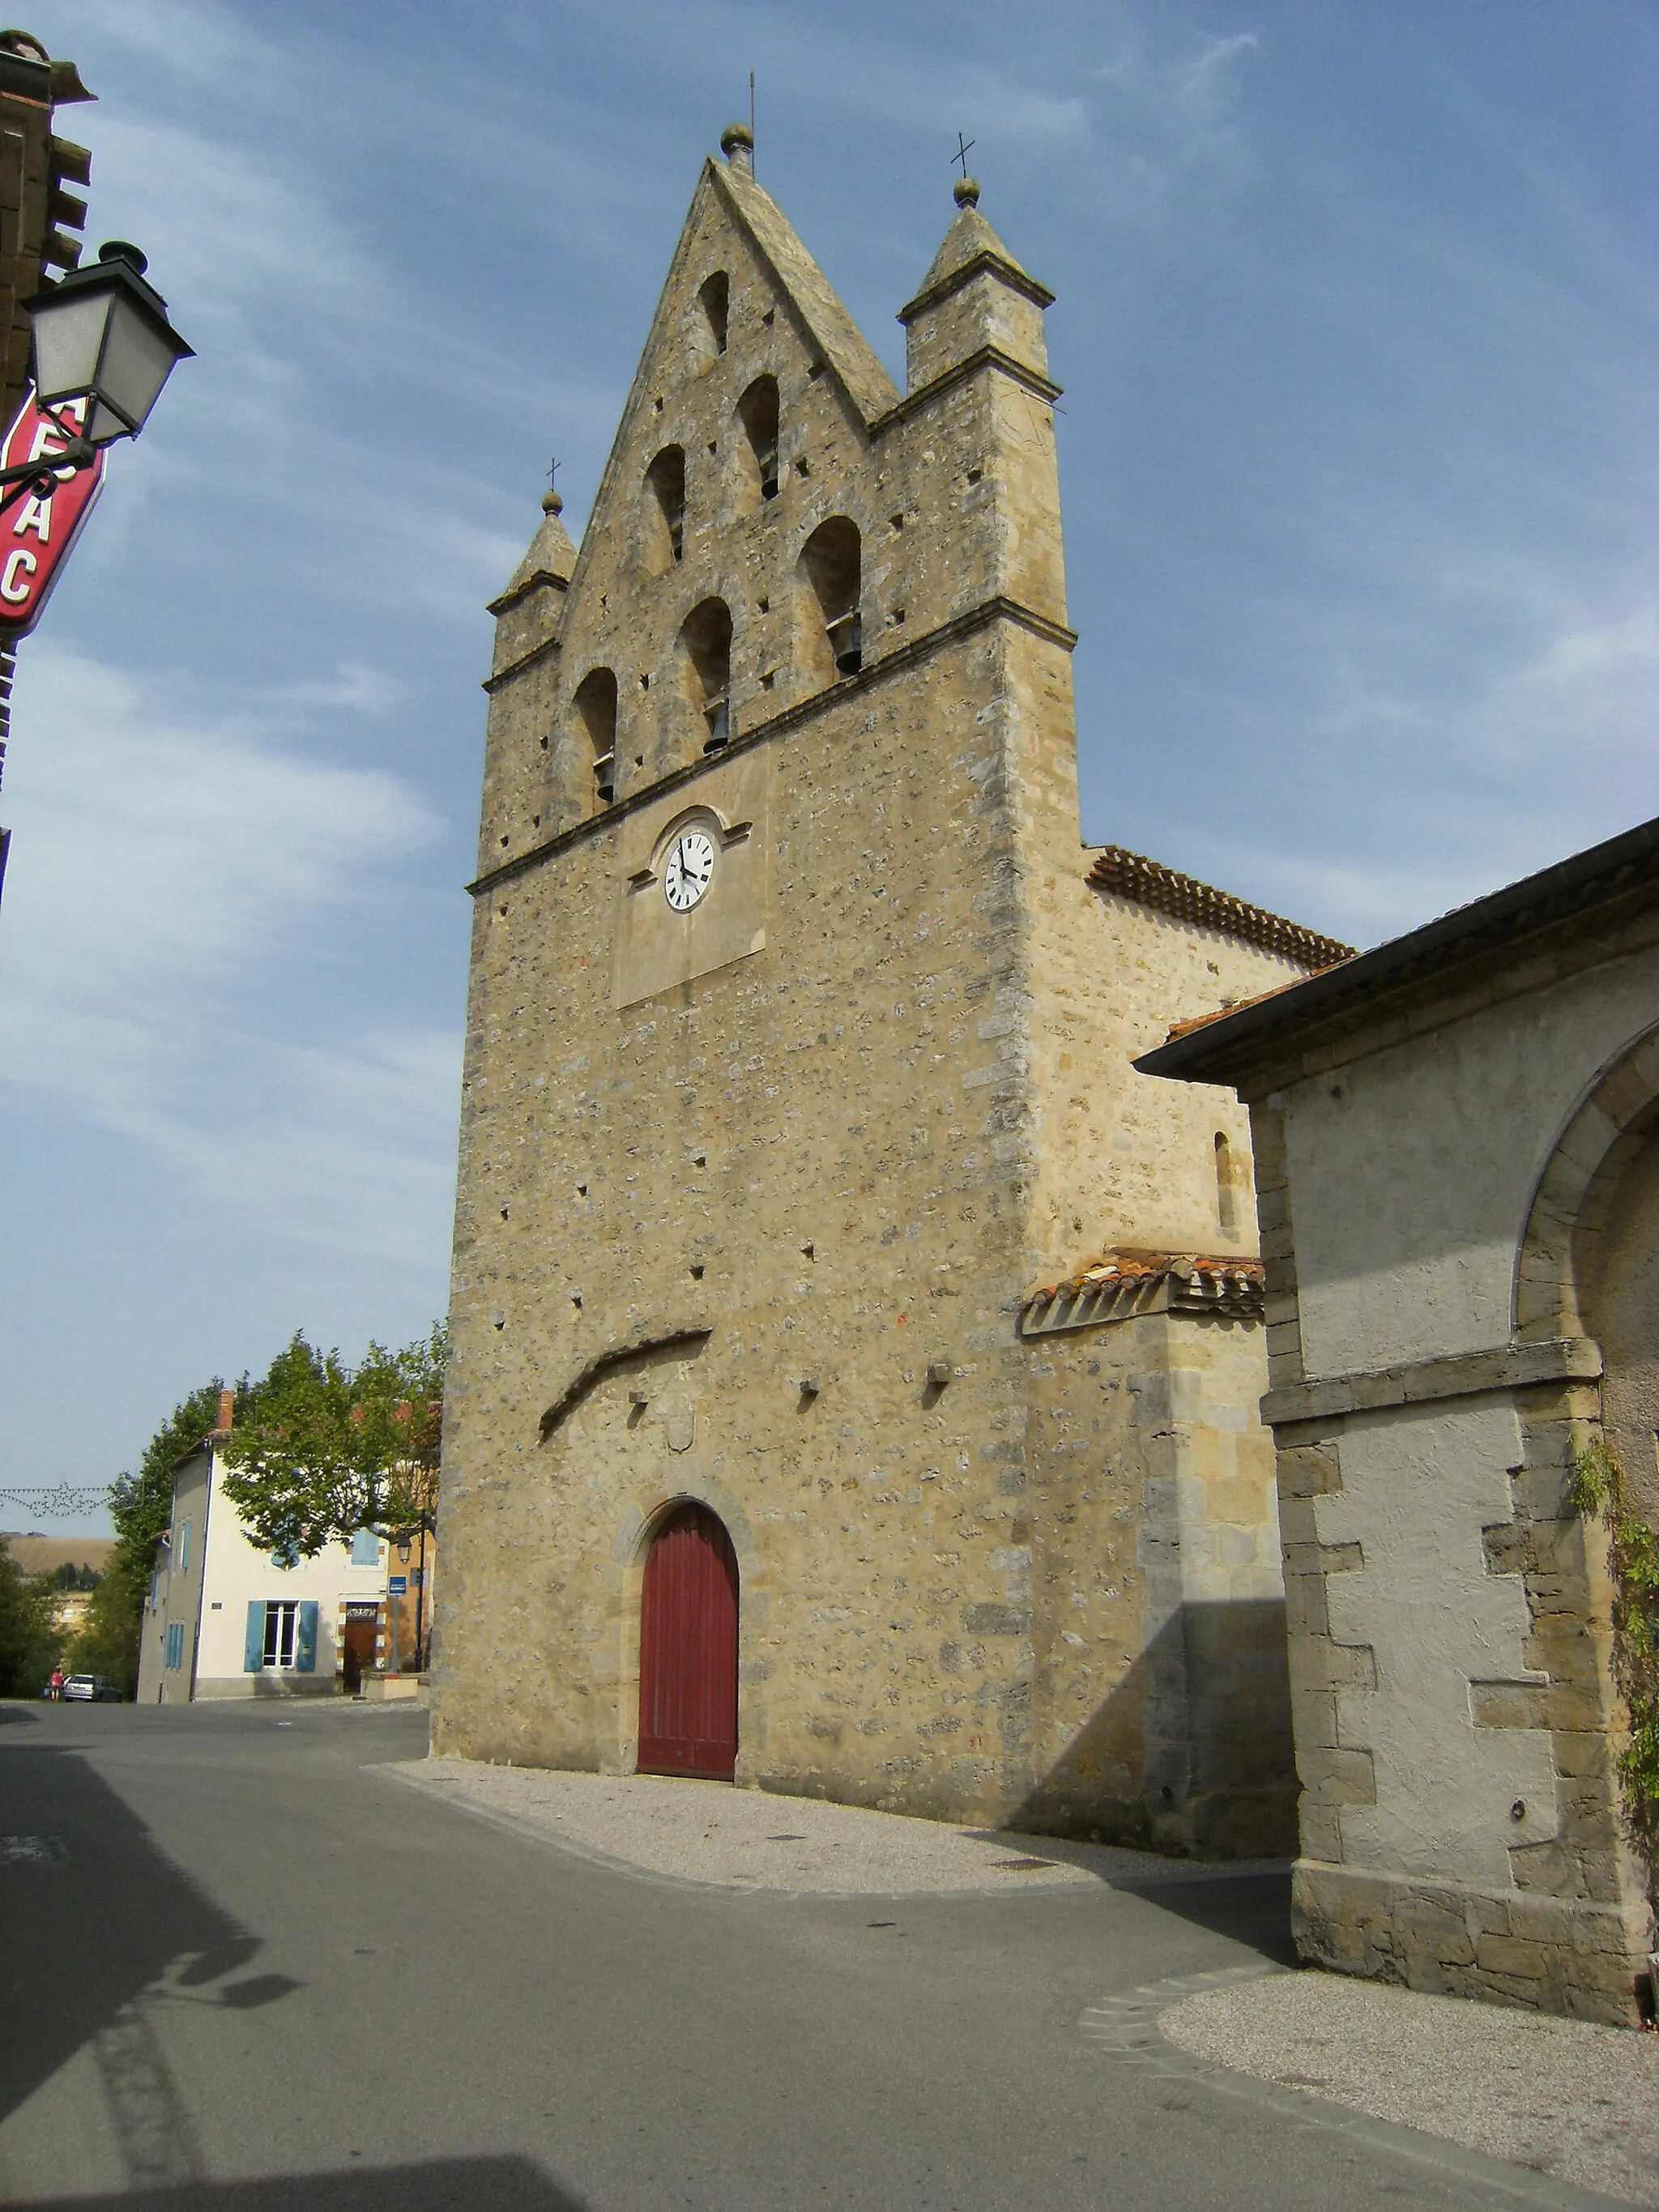 Photo showing: Facade of the church at the main junction in Salles-sur-l'Hers, Aude.